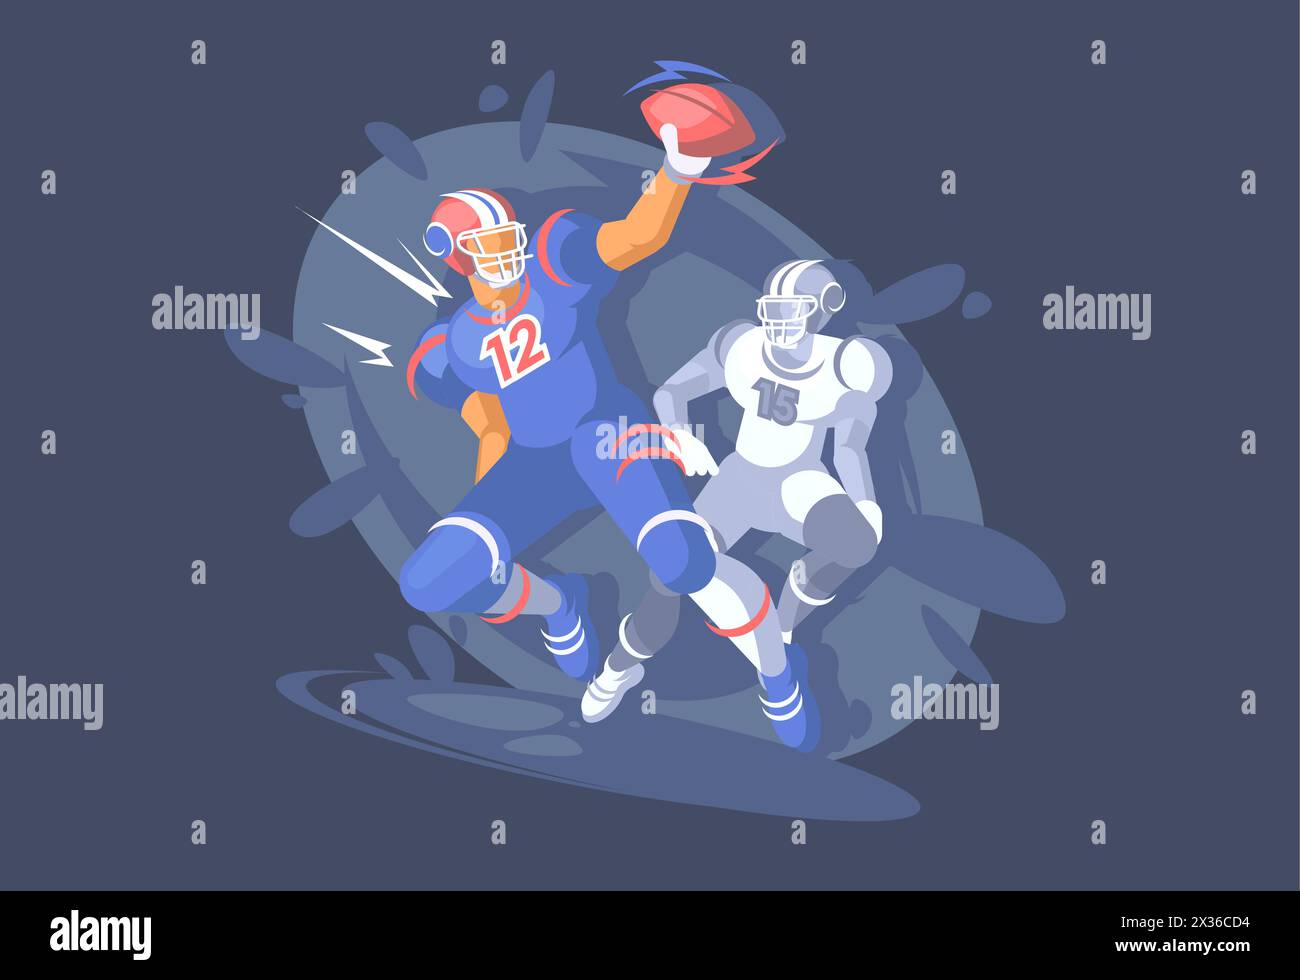 American football, sports event, a football player catches the ball. Stock Vector